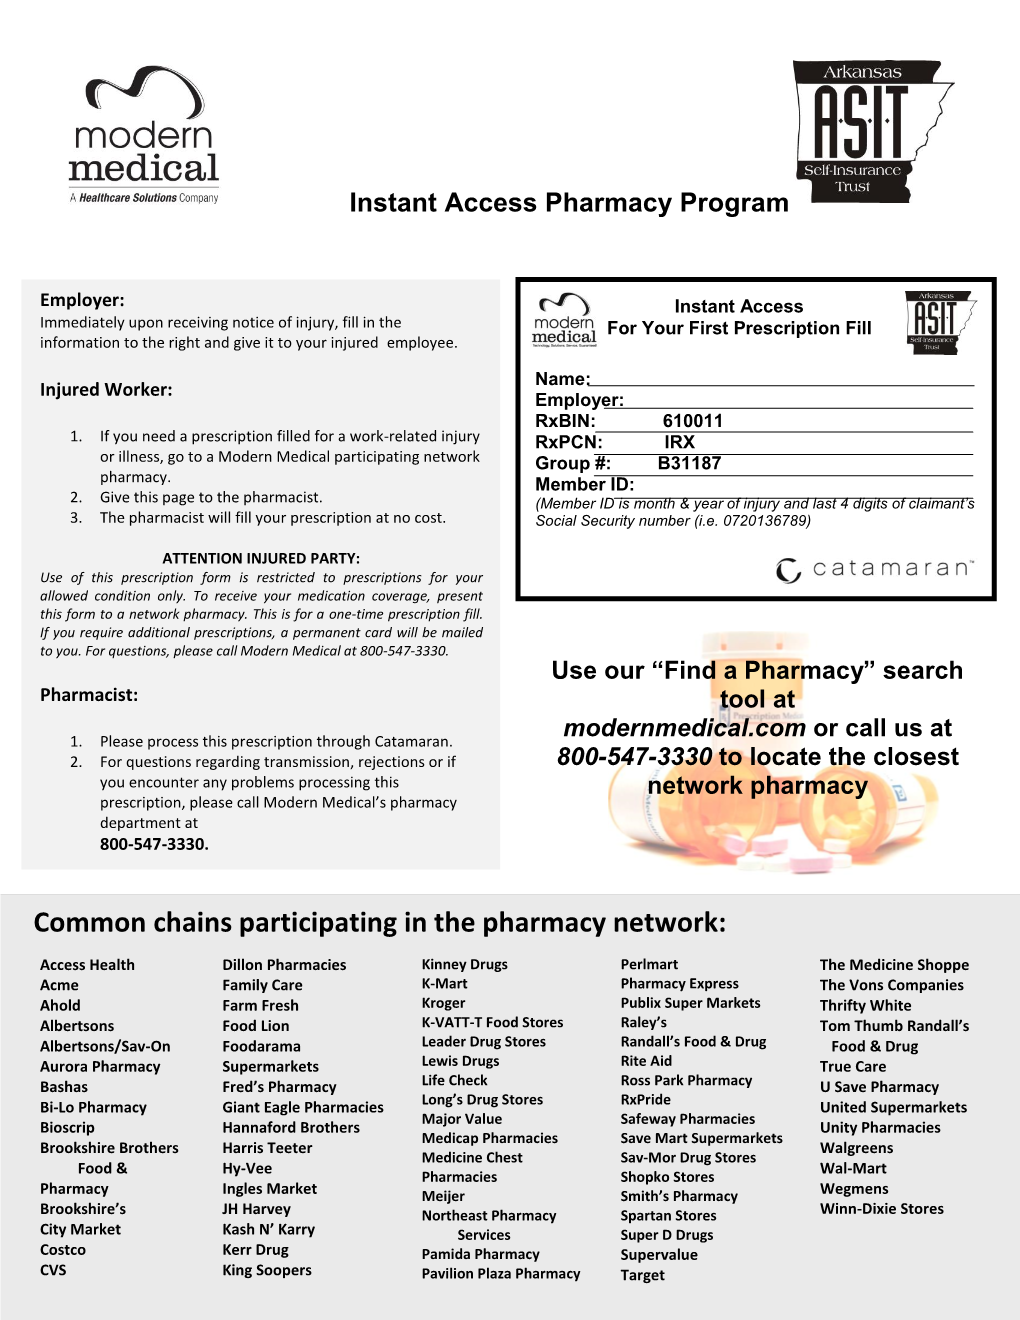 Common Chains Participating in the Pharmacy Network